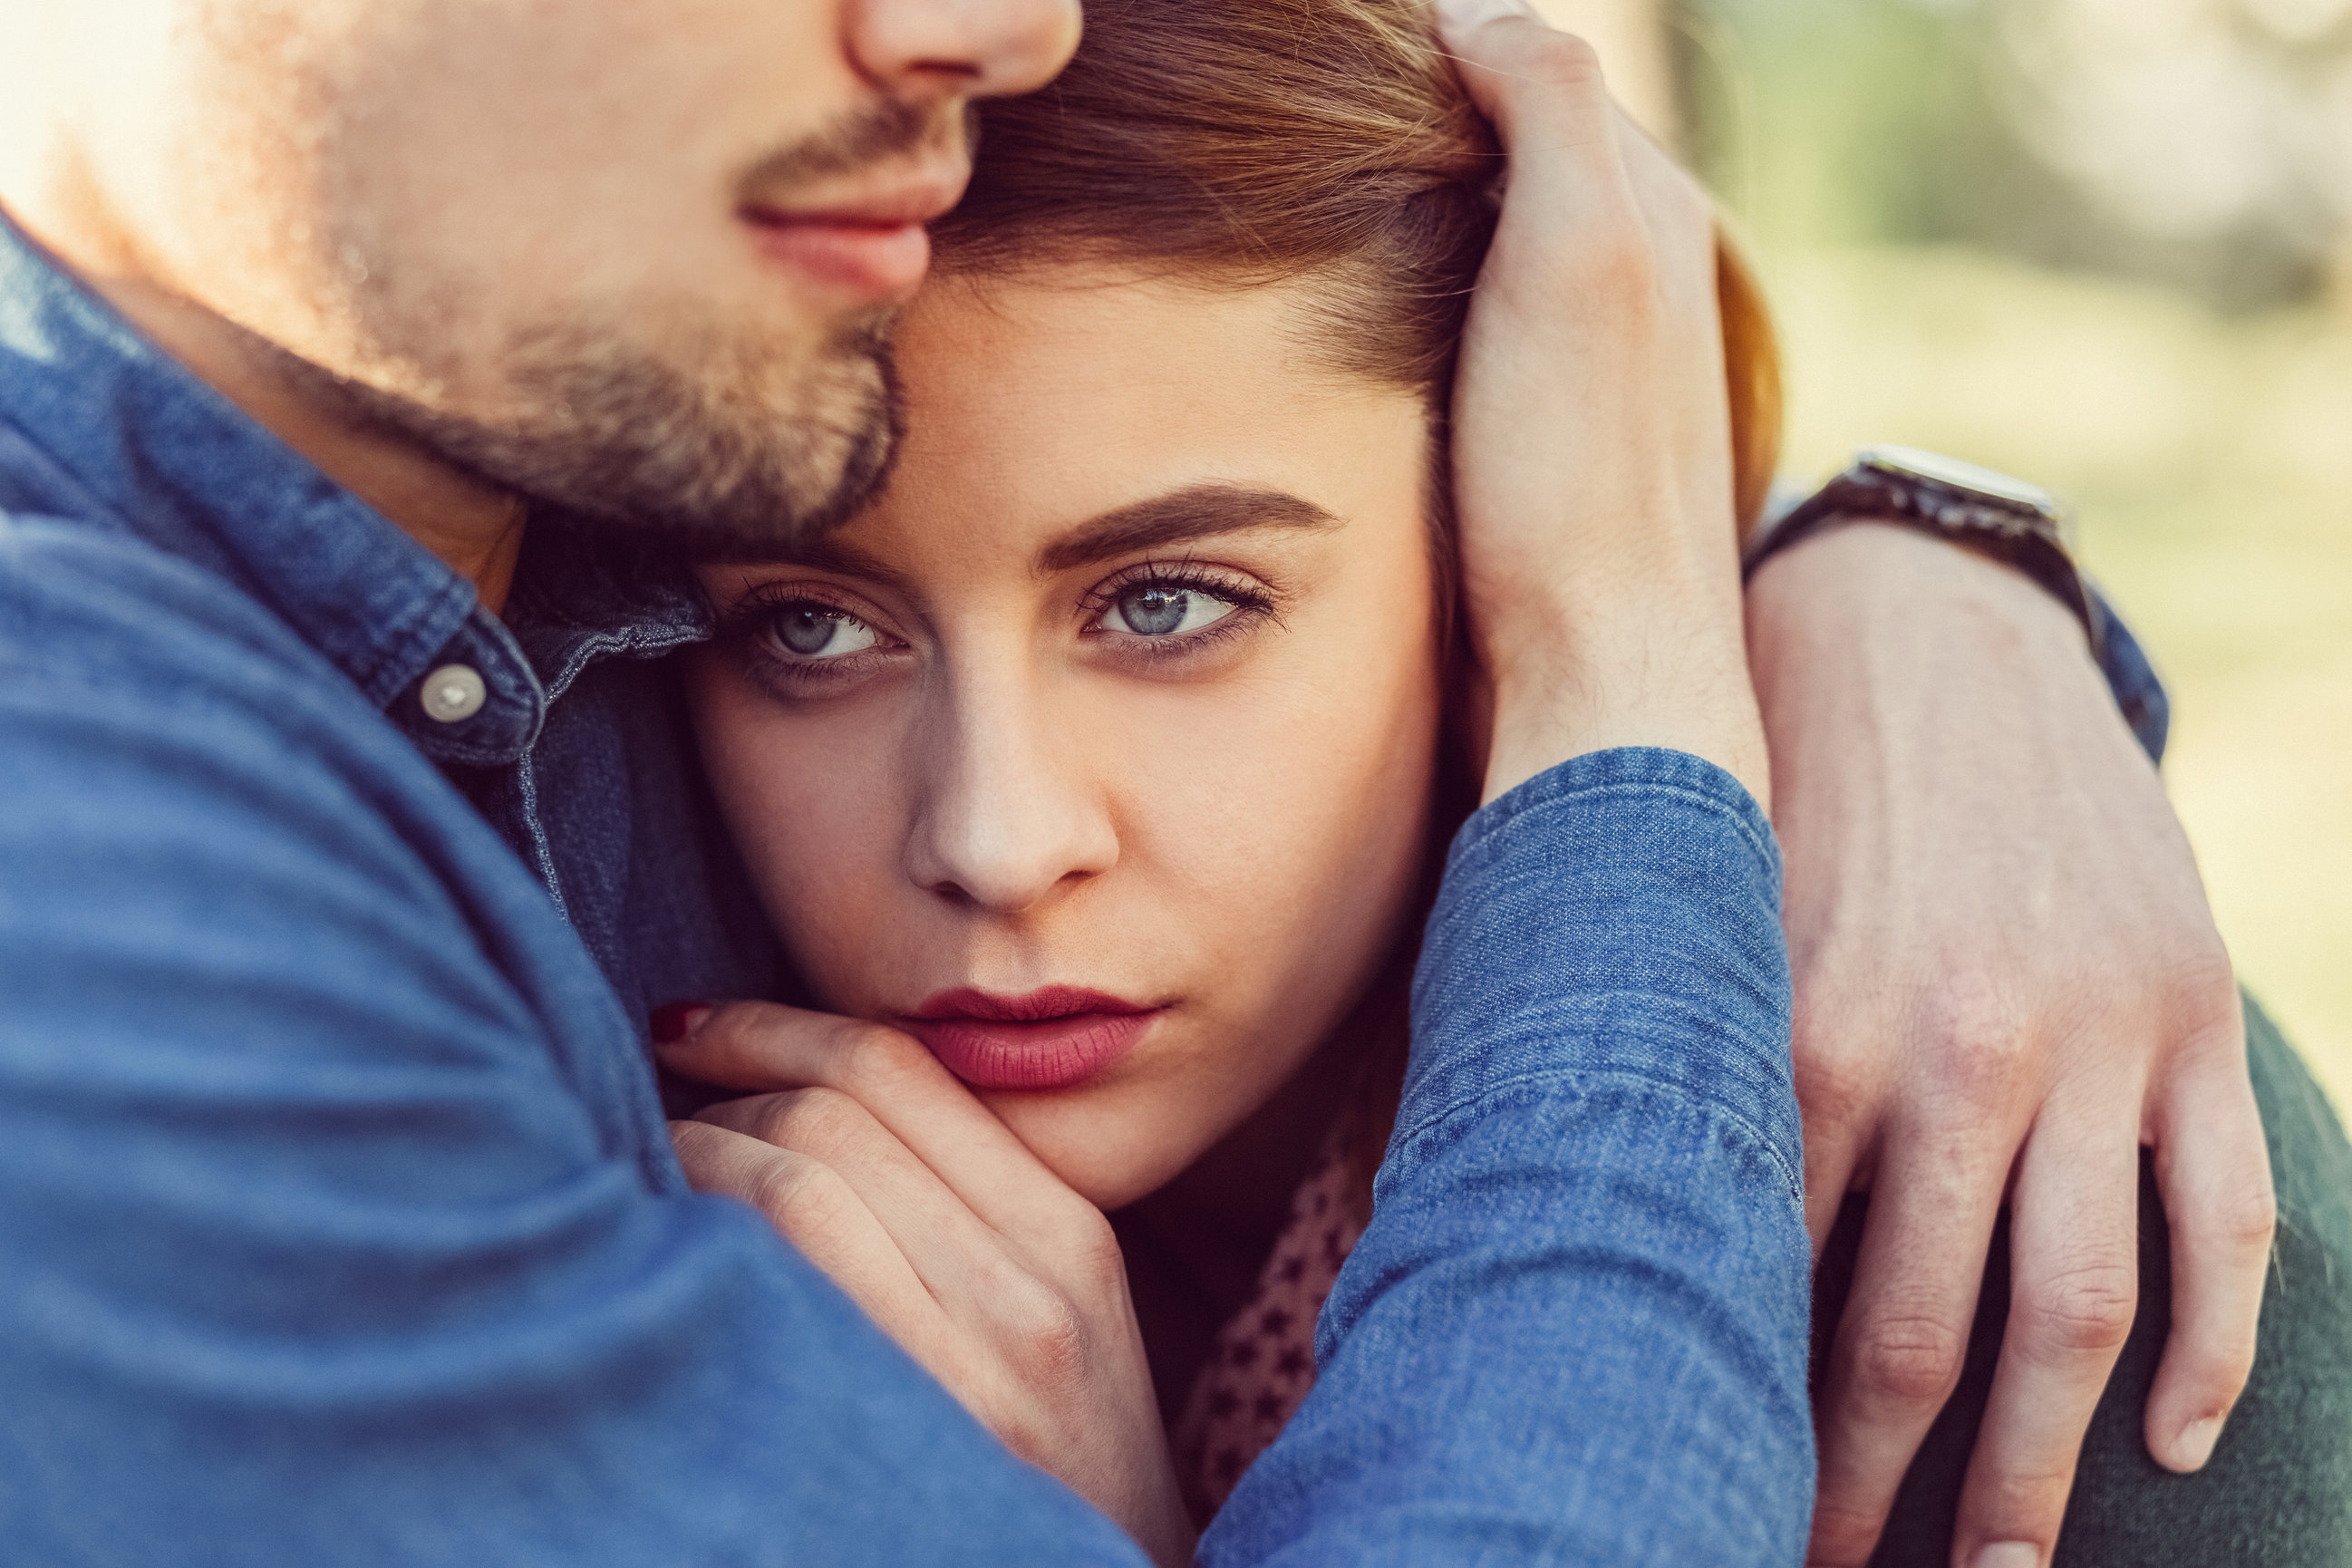 Relationship Anxiety Is Real: Here's How To Deal